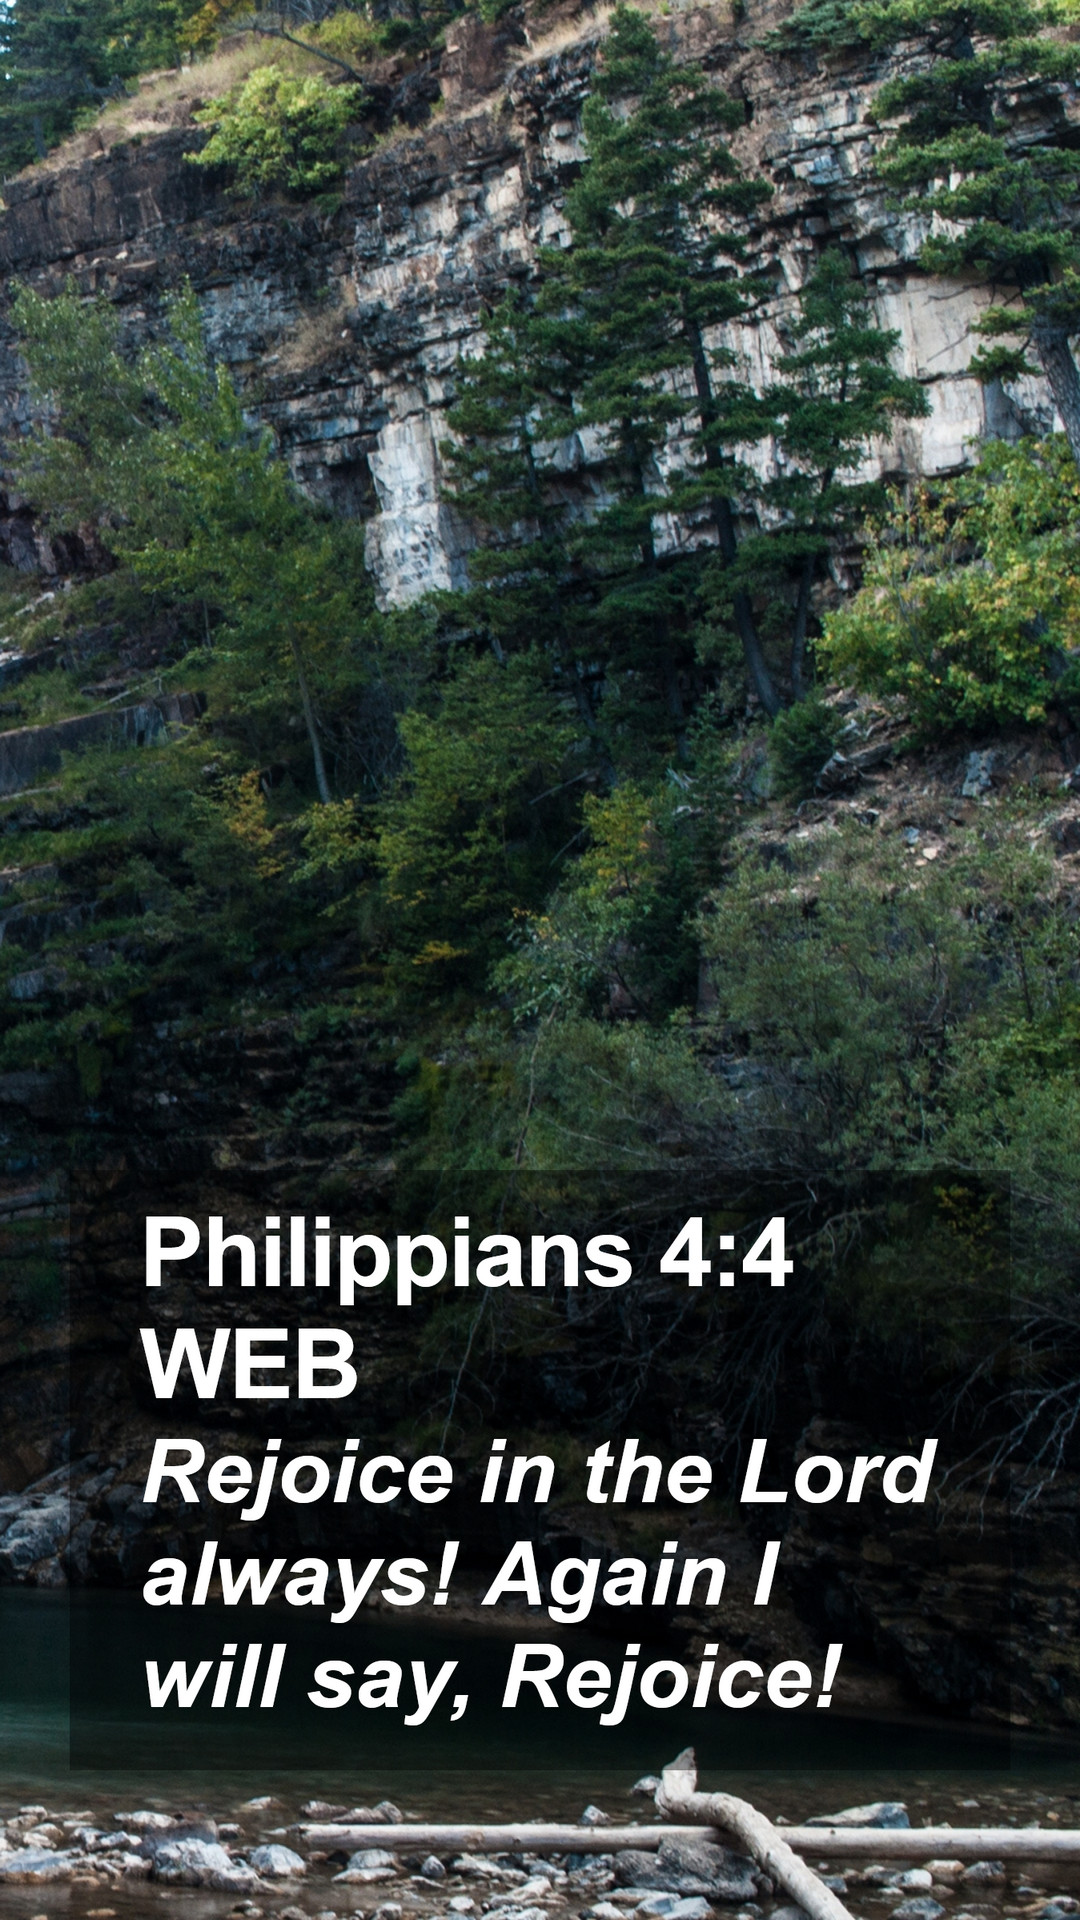 Philippians 4:4 WEB Mobile Phone Wallpaper in the Lord always! Again I will say